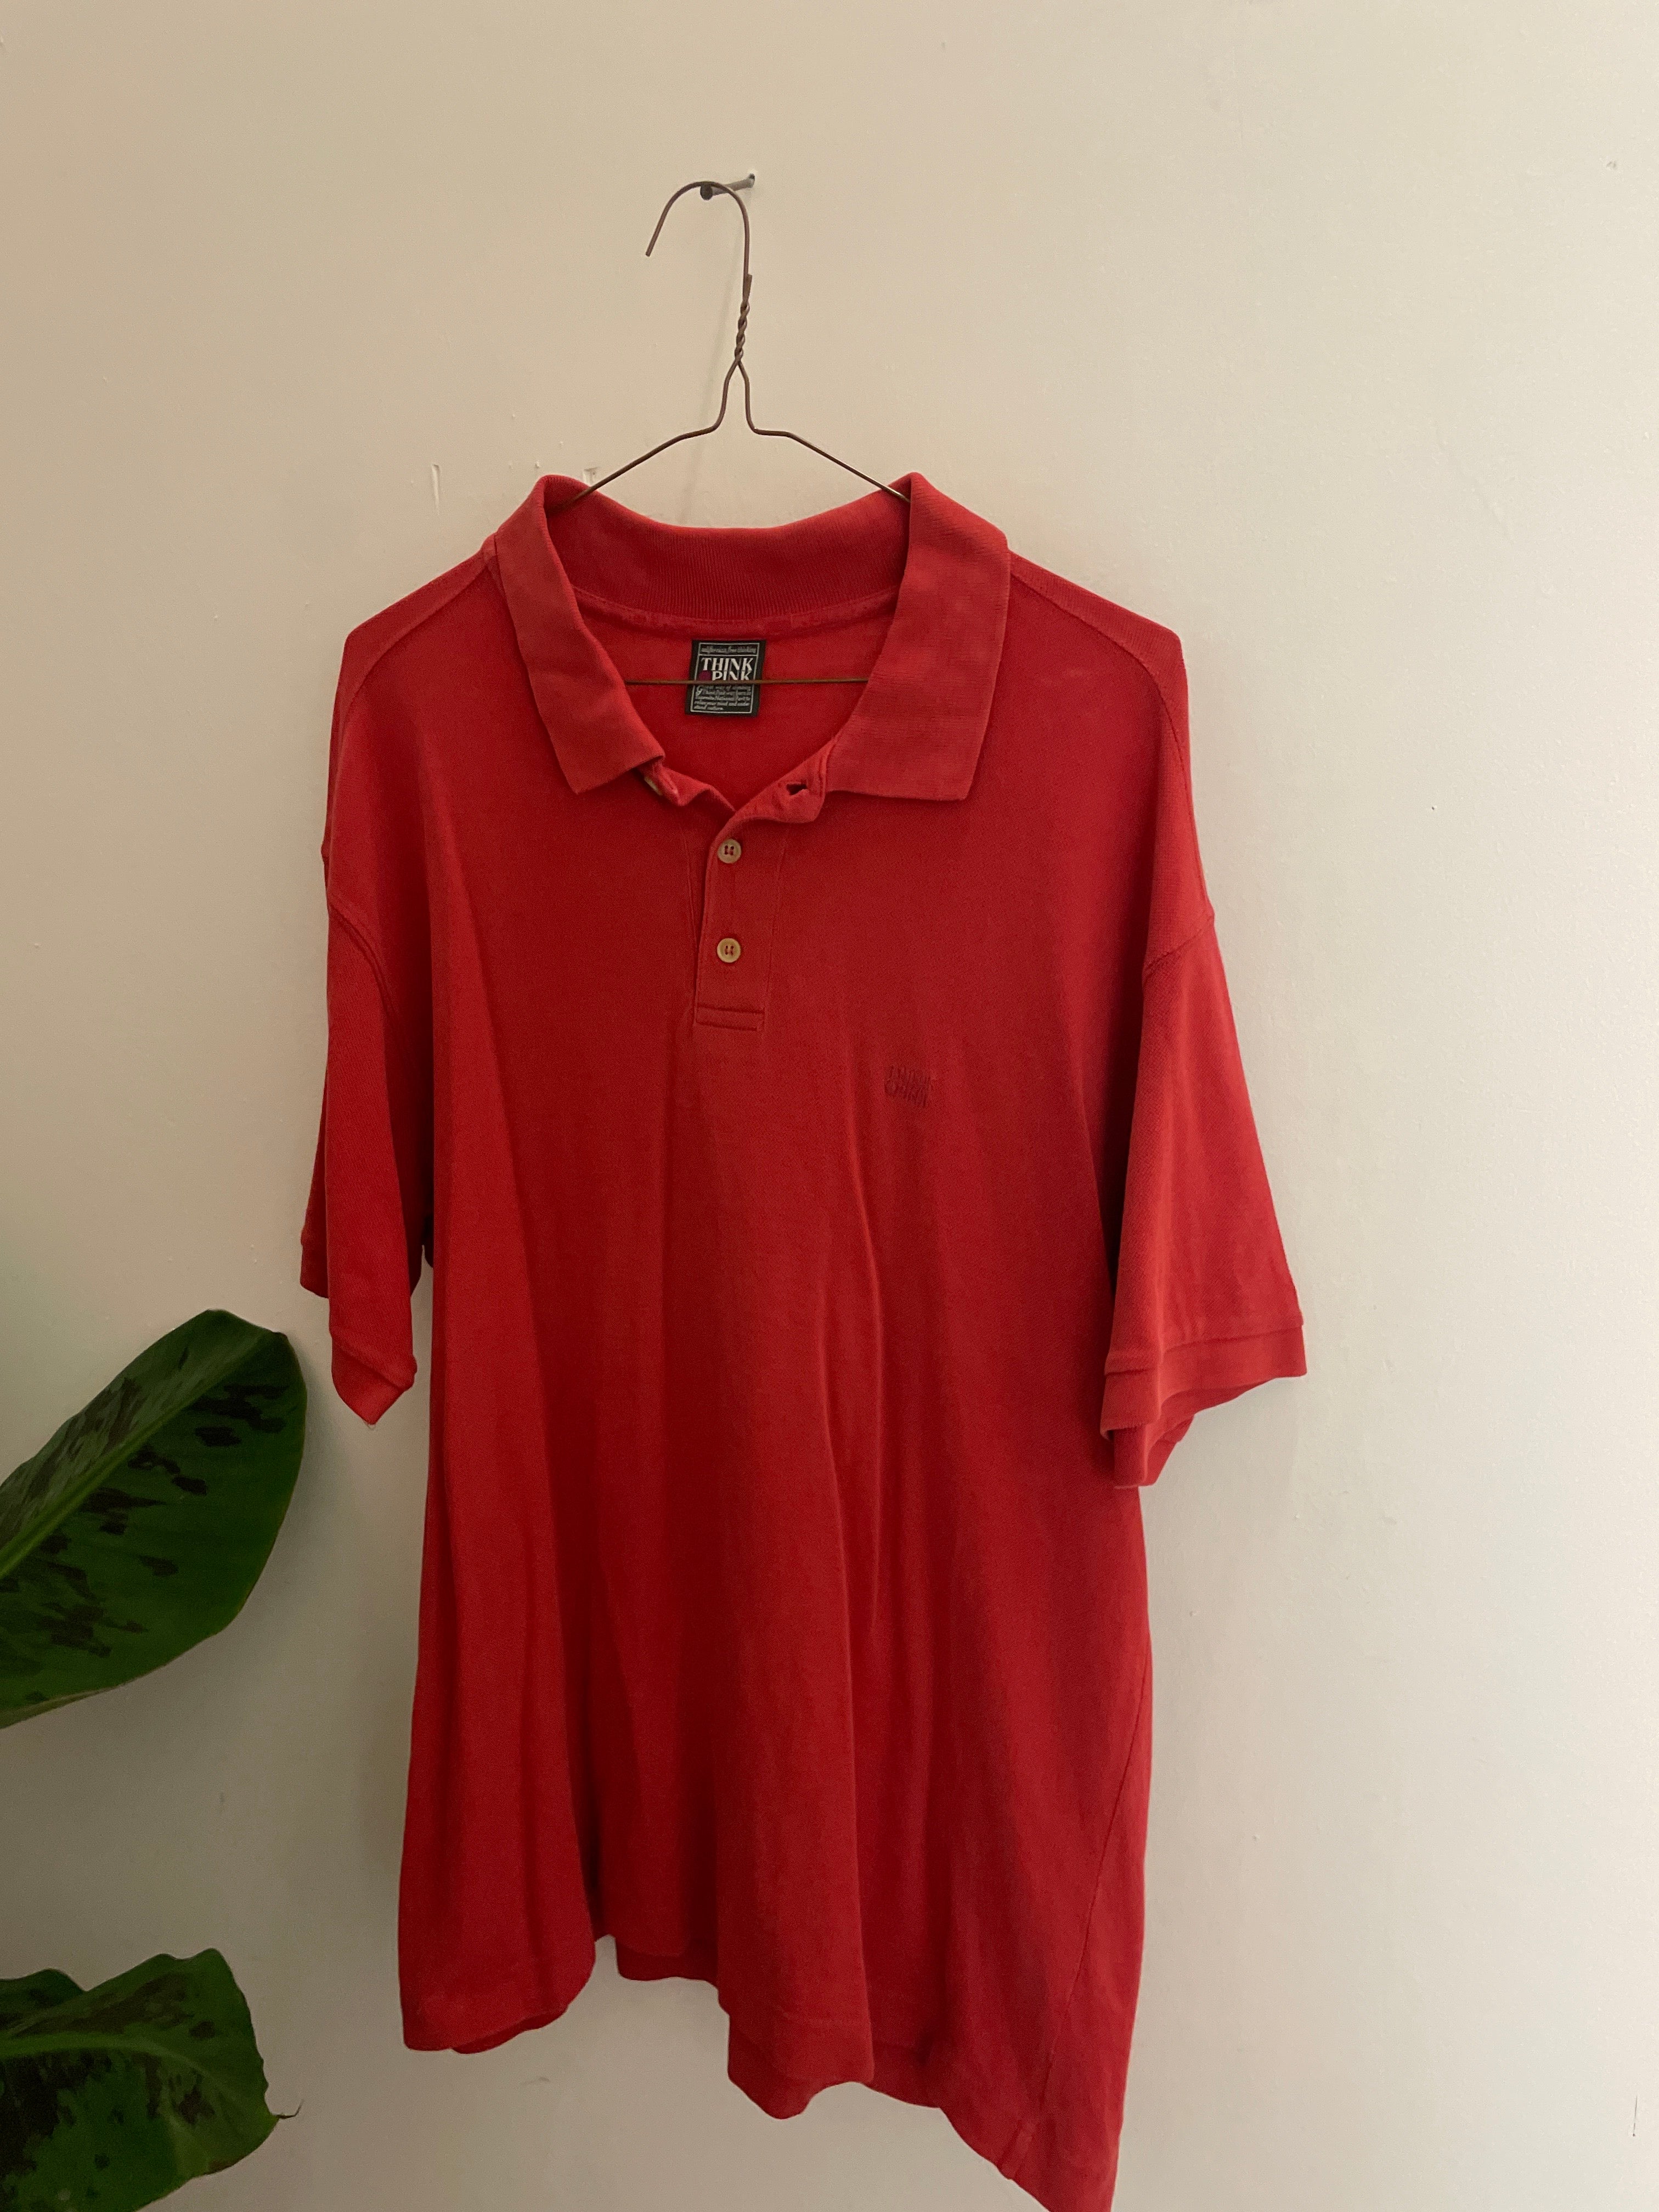 Vintage Think & pink red mens polo shirt size Xl| SKU 1536